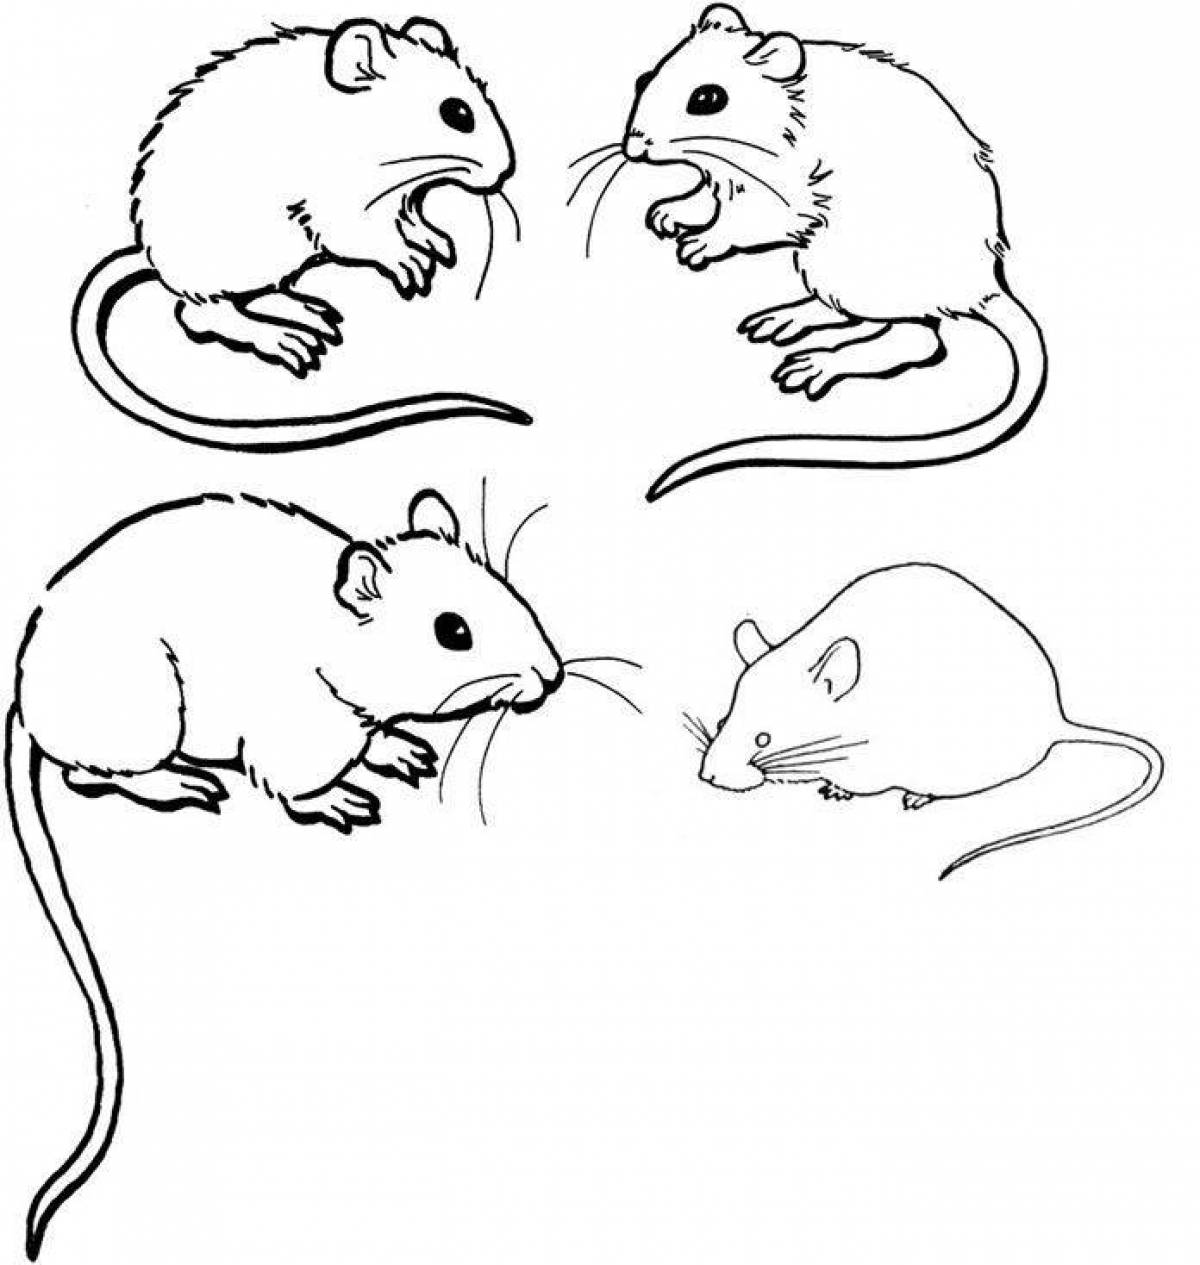 Naughty mouse coloring book